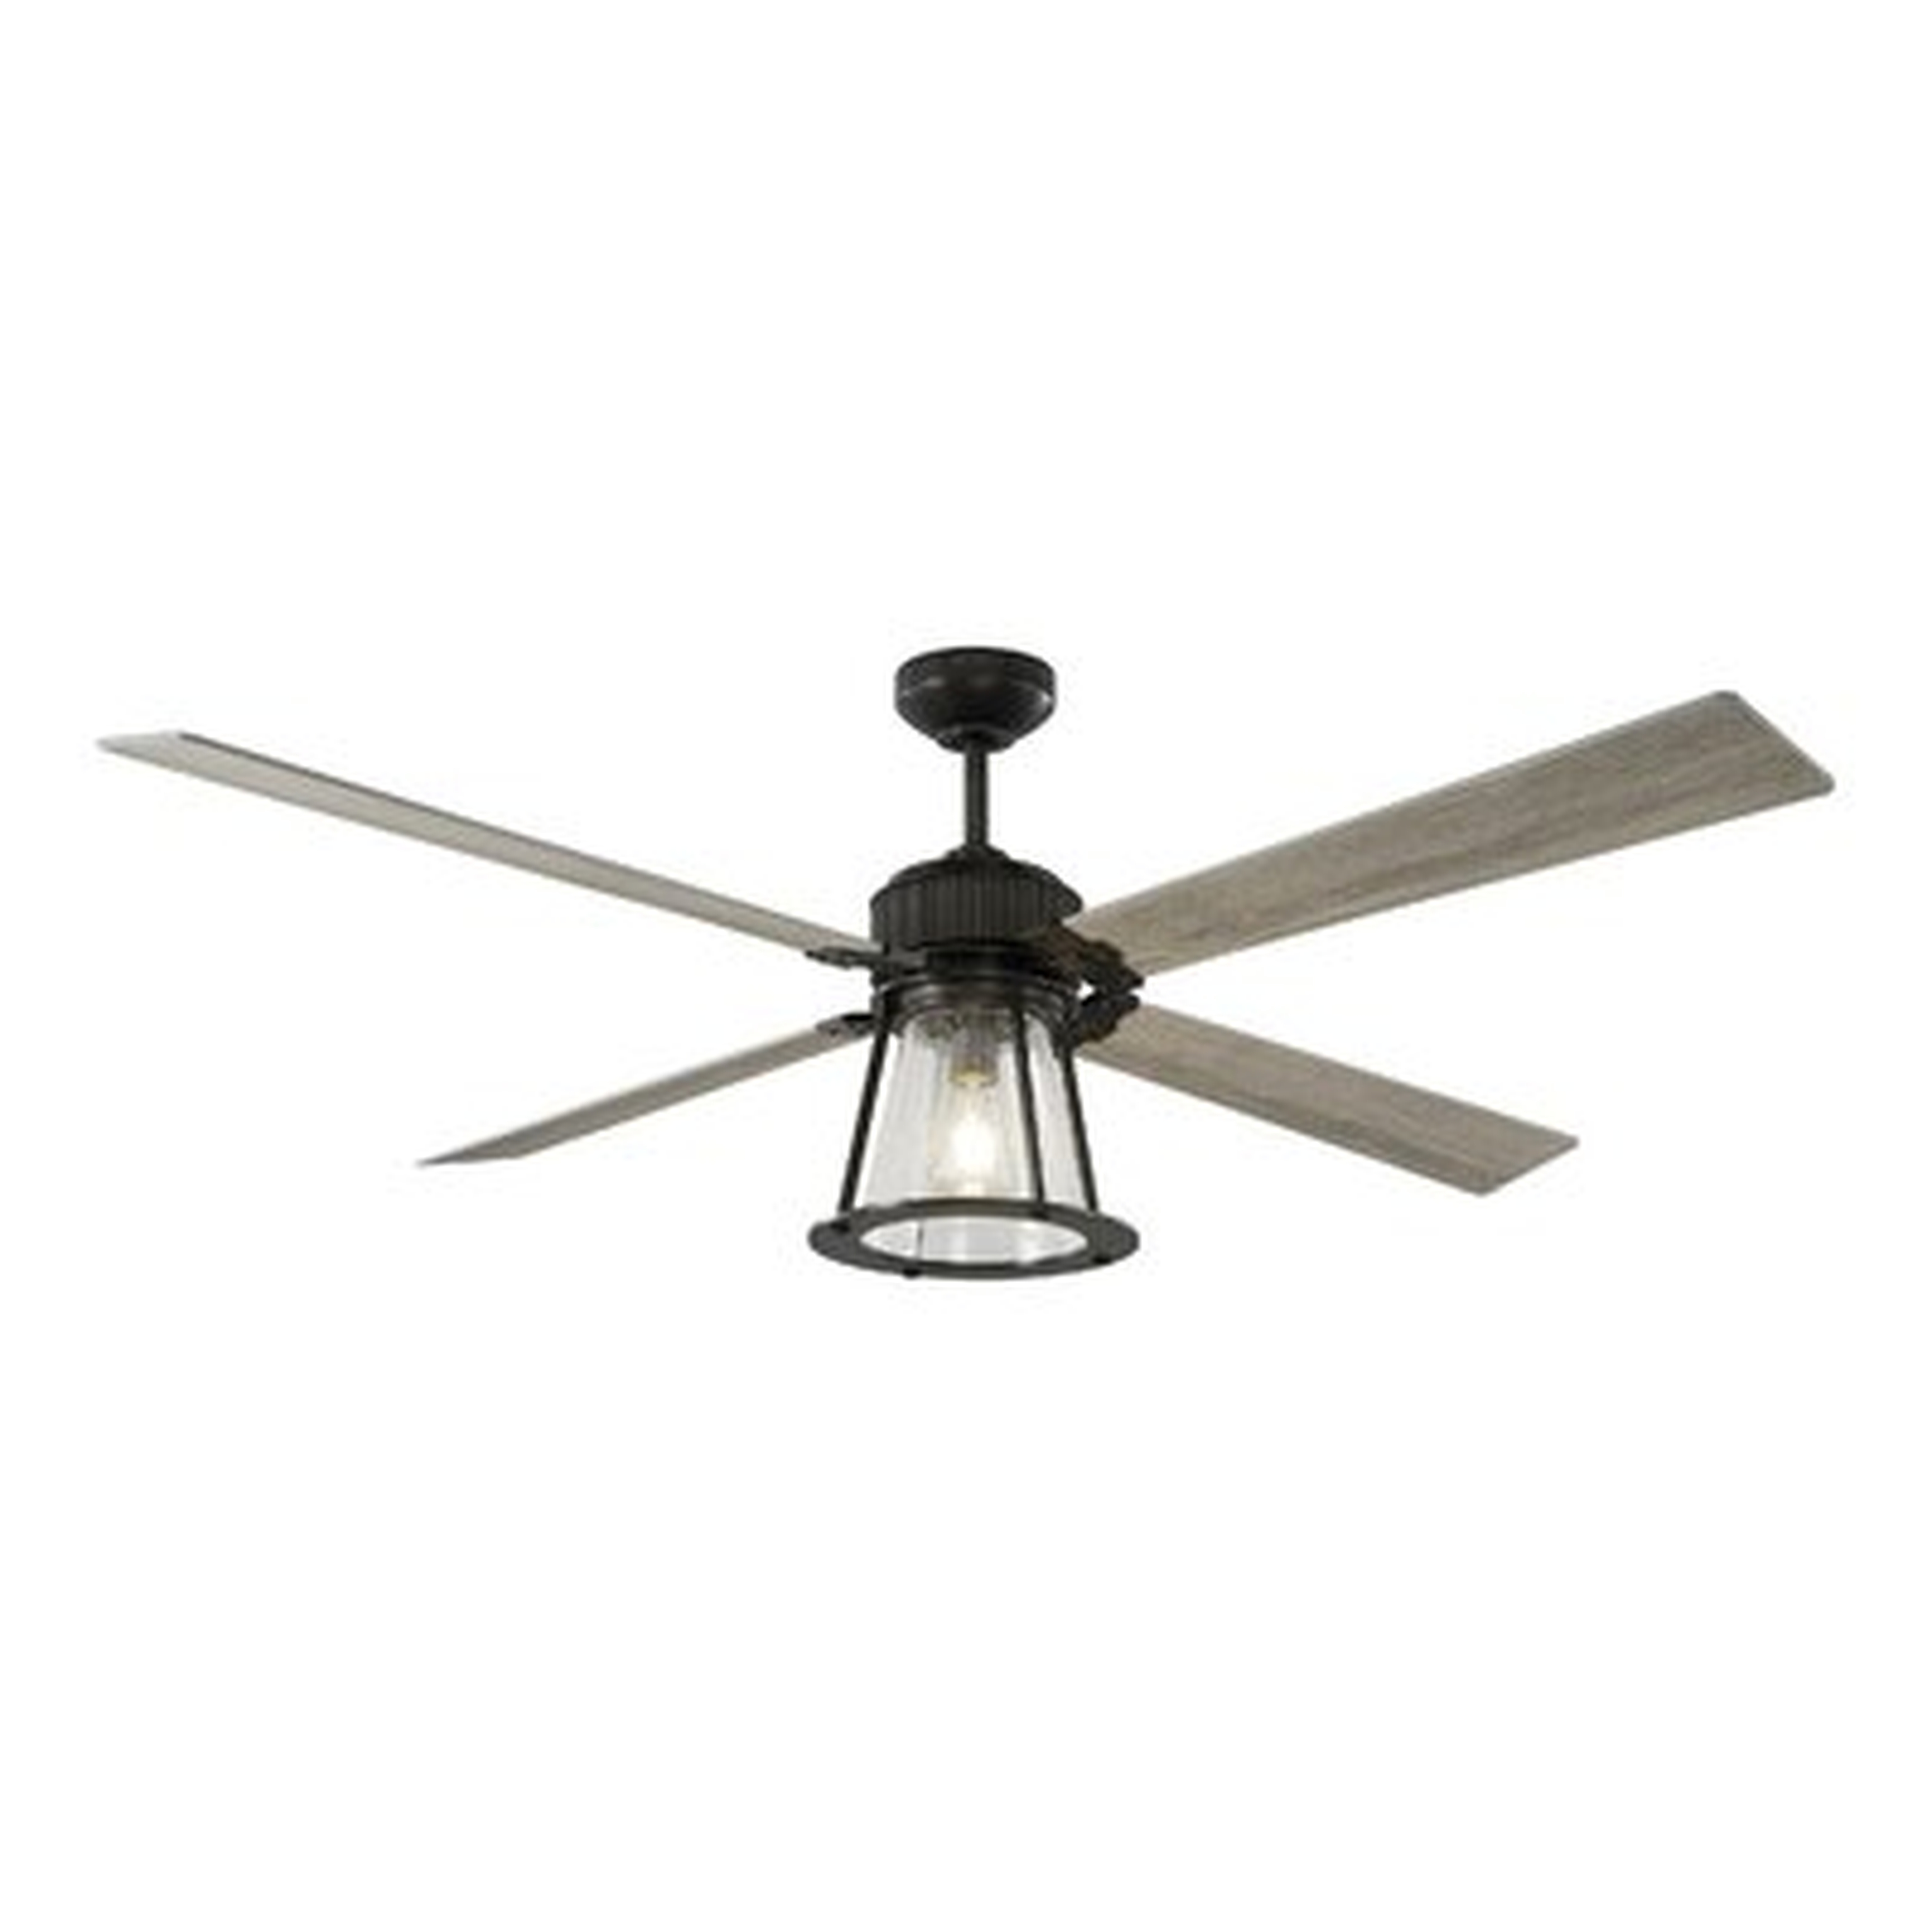 60" Dowlen 4 - Blade Standard Ceiling Fan with Remote Control and Light Kit Included - Birch Lane